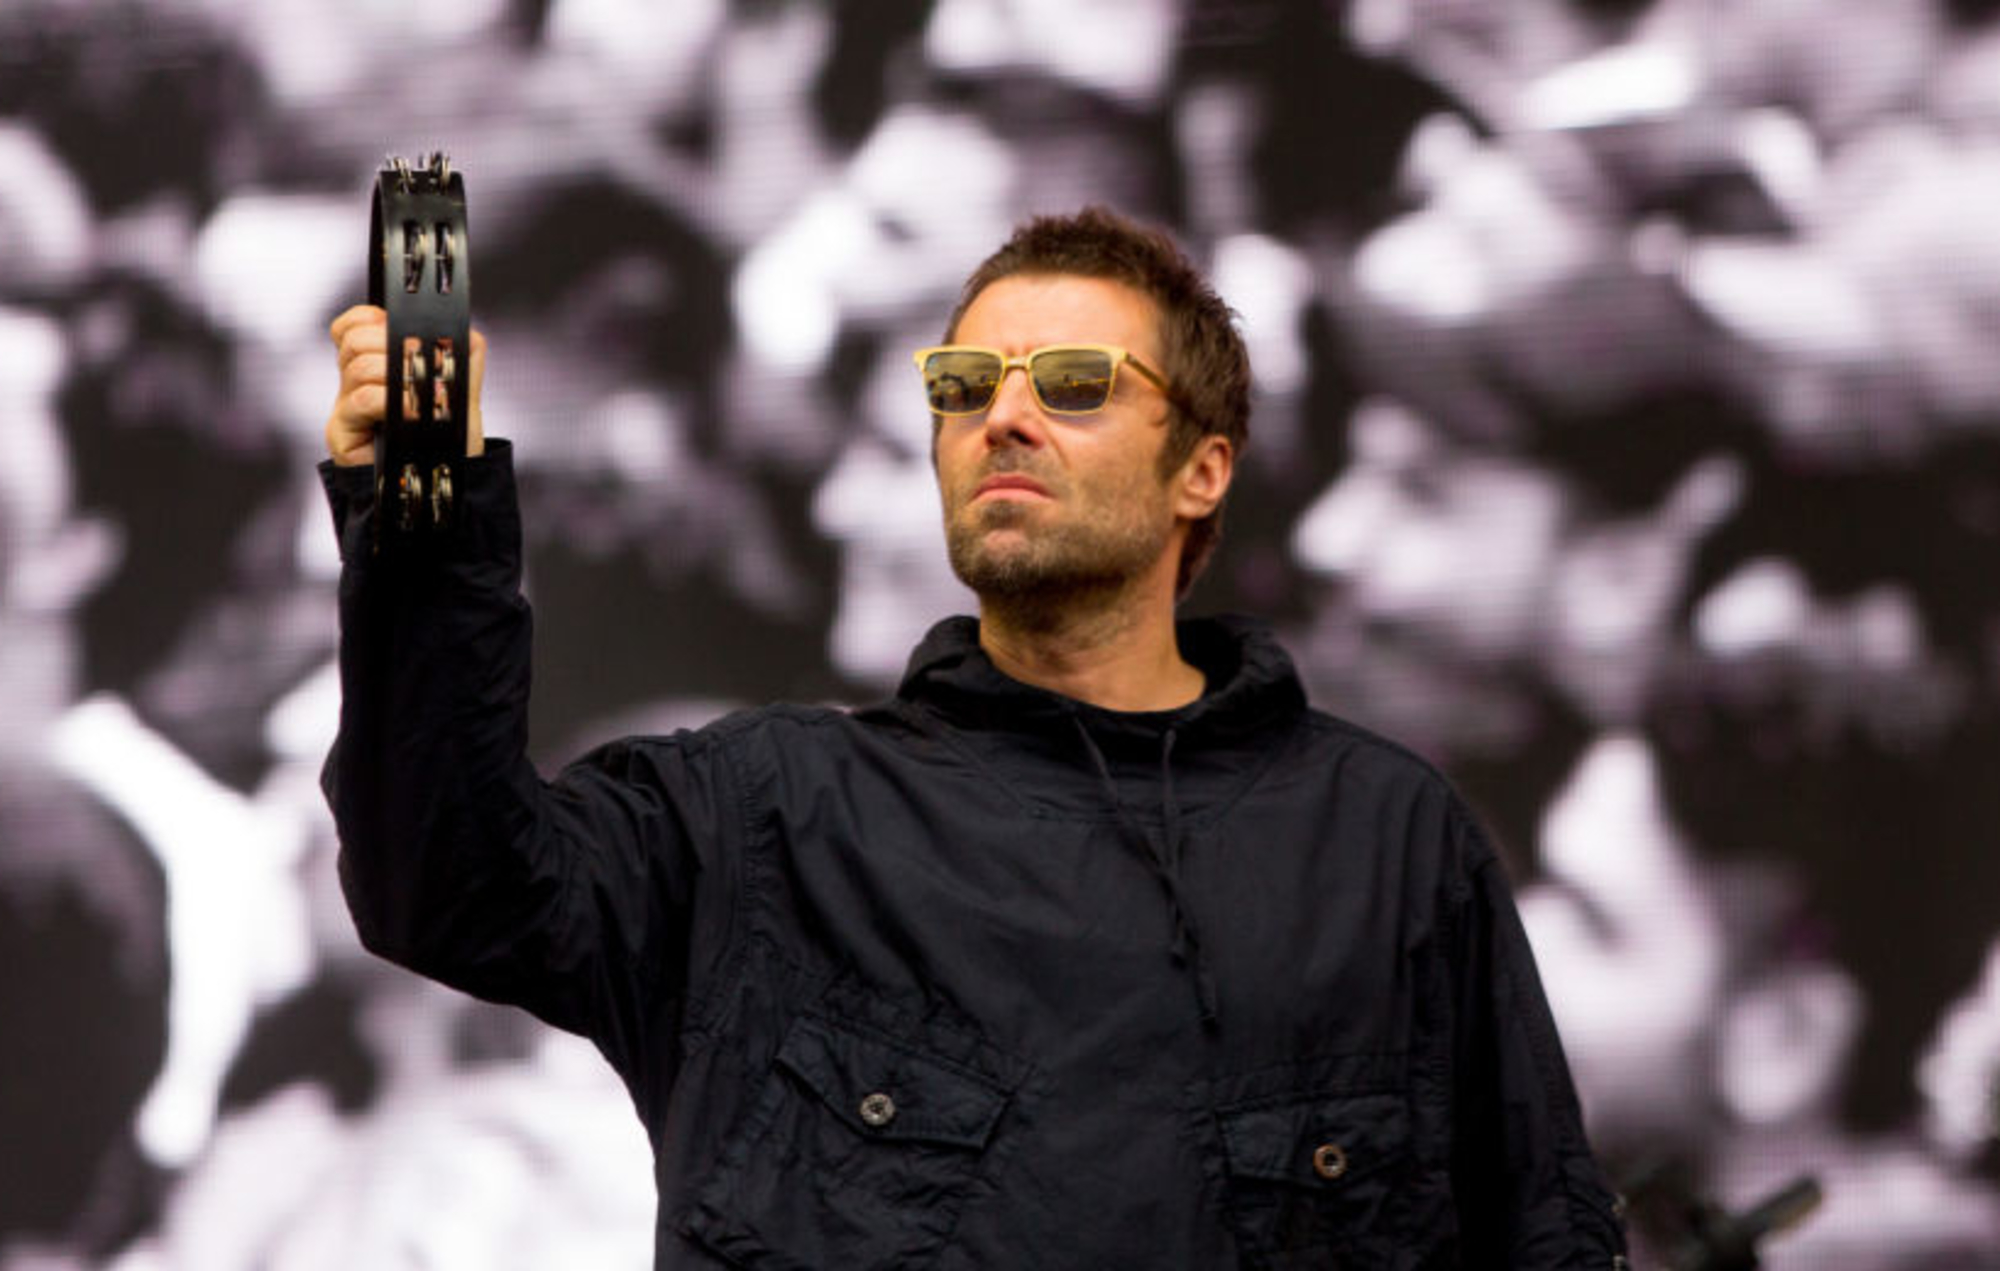 Liam Gallagher no participará en (What's The Story) Morning Glory